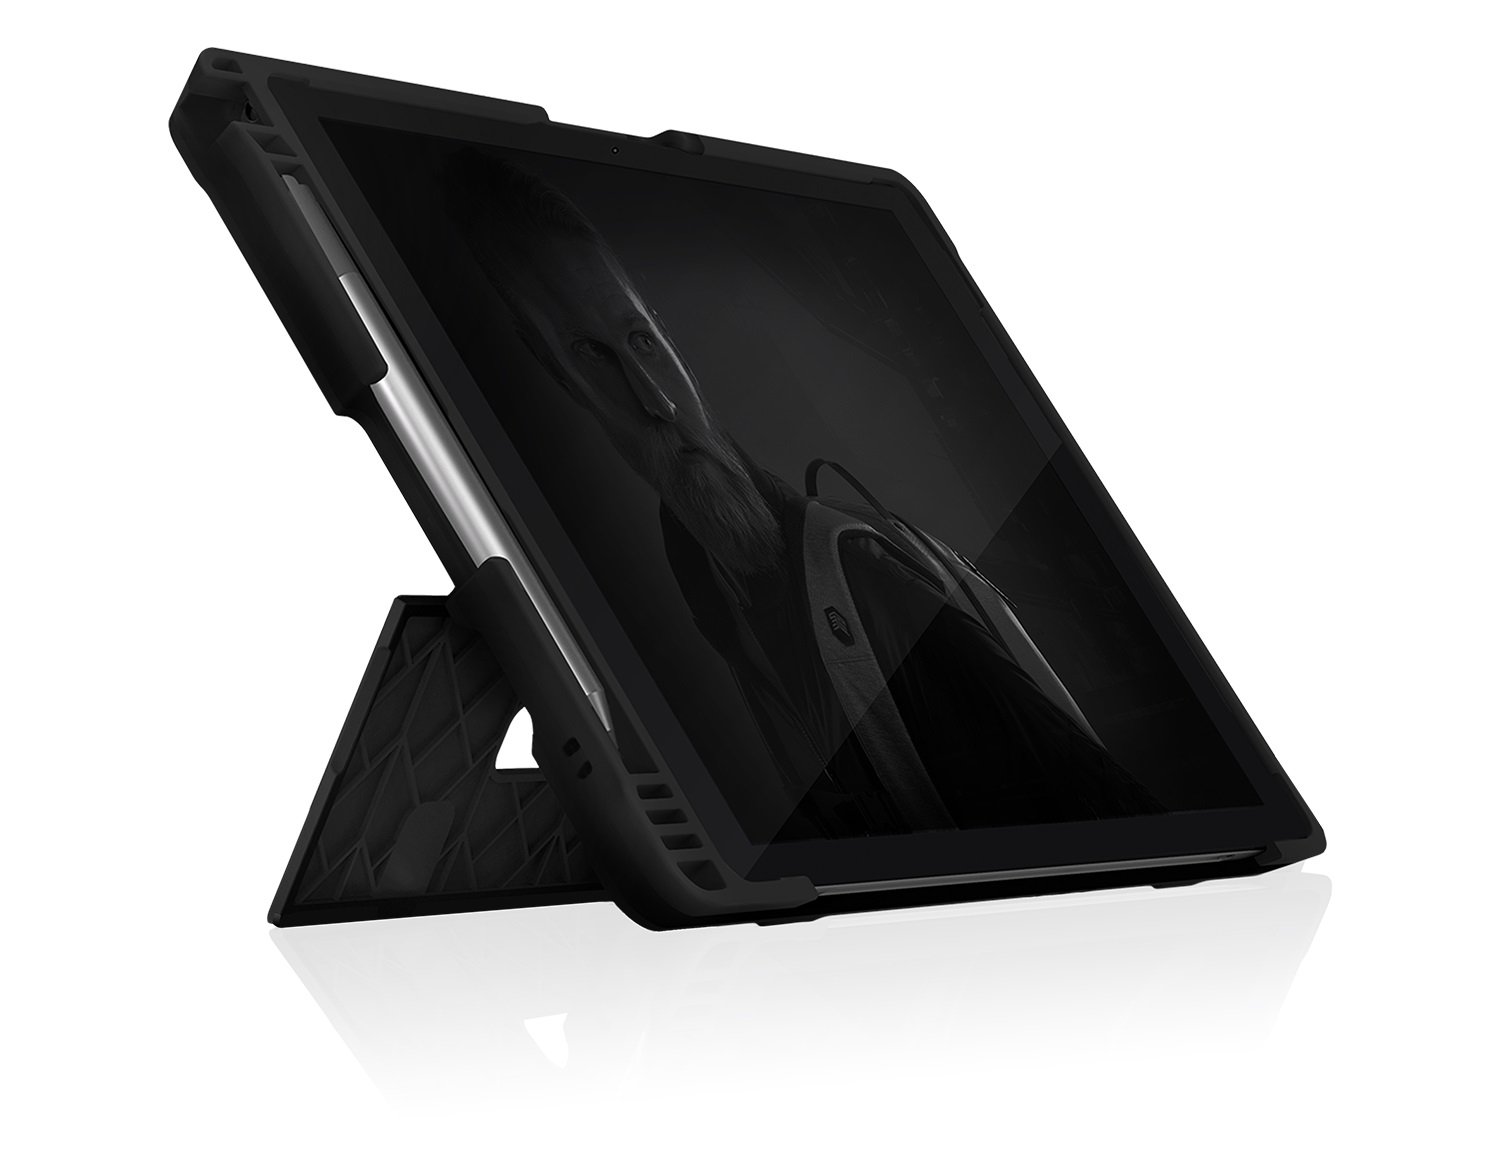 STM Dux Shell Rugged Case for Surface Pro - Black